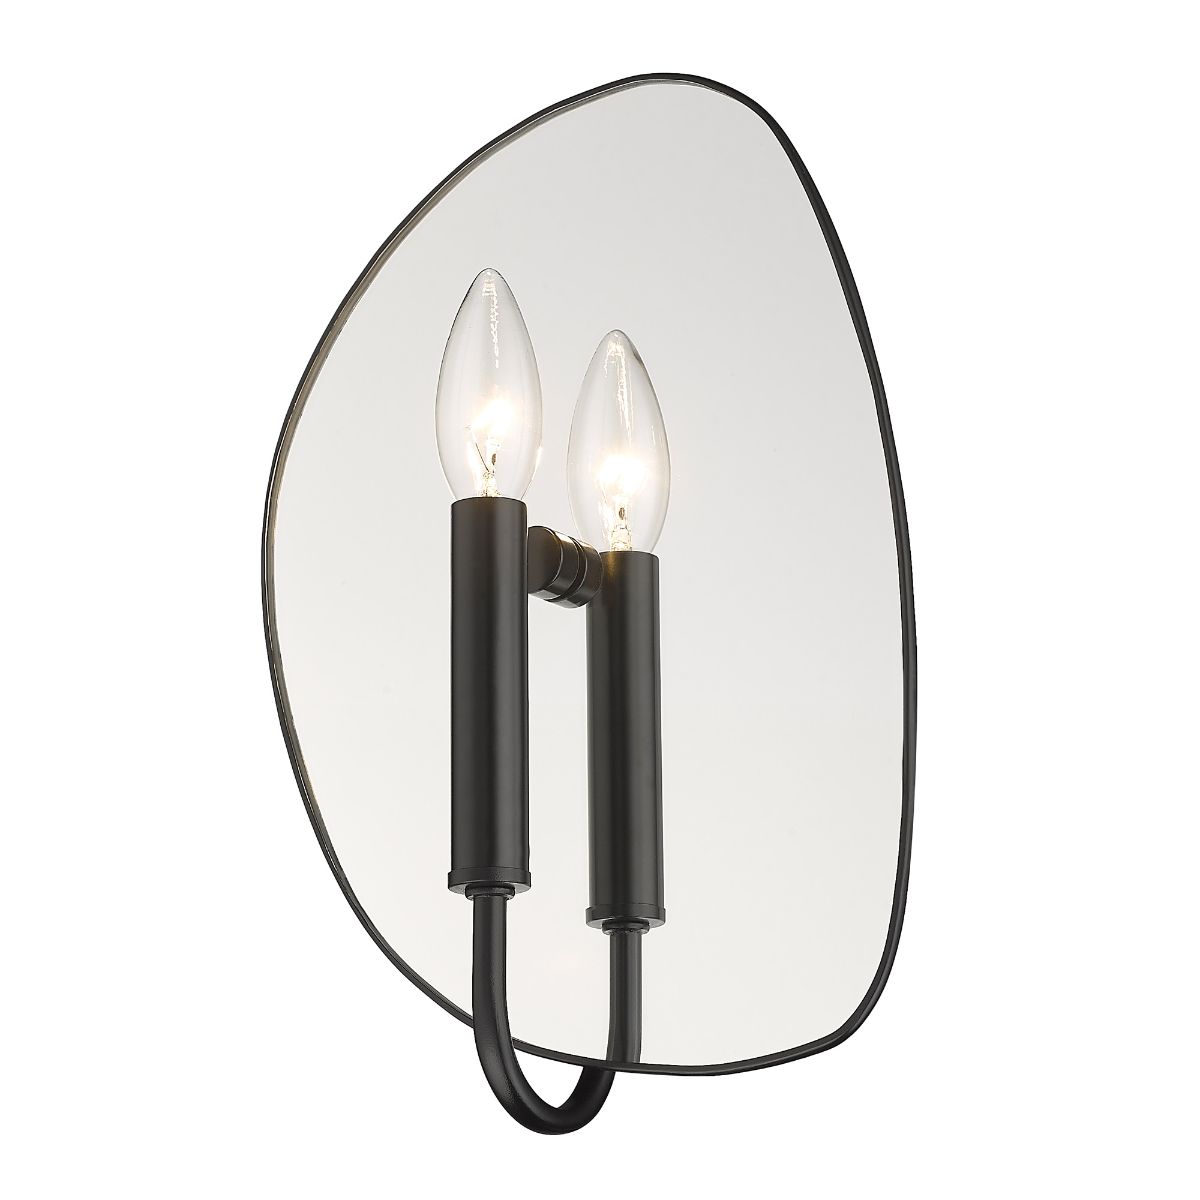 Tessa 12 in. Armed Wall Sconce Matte Black Finish